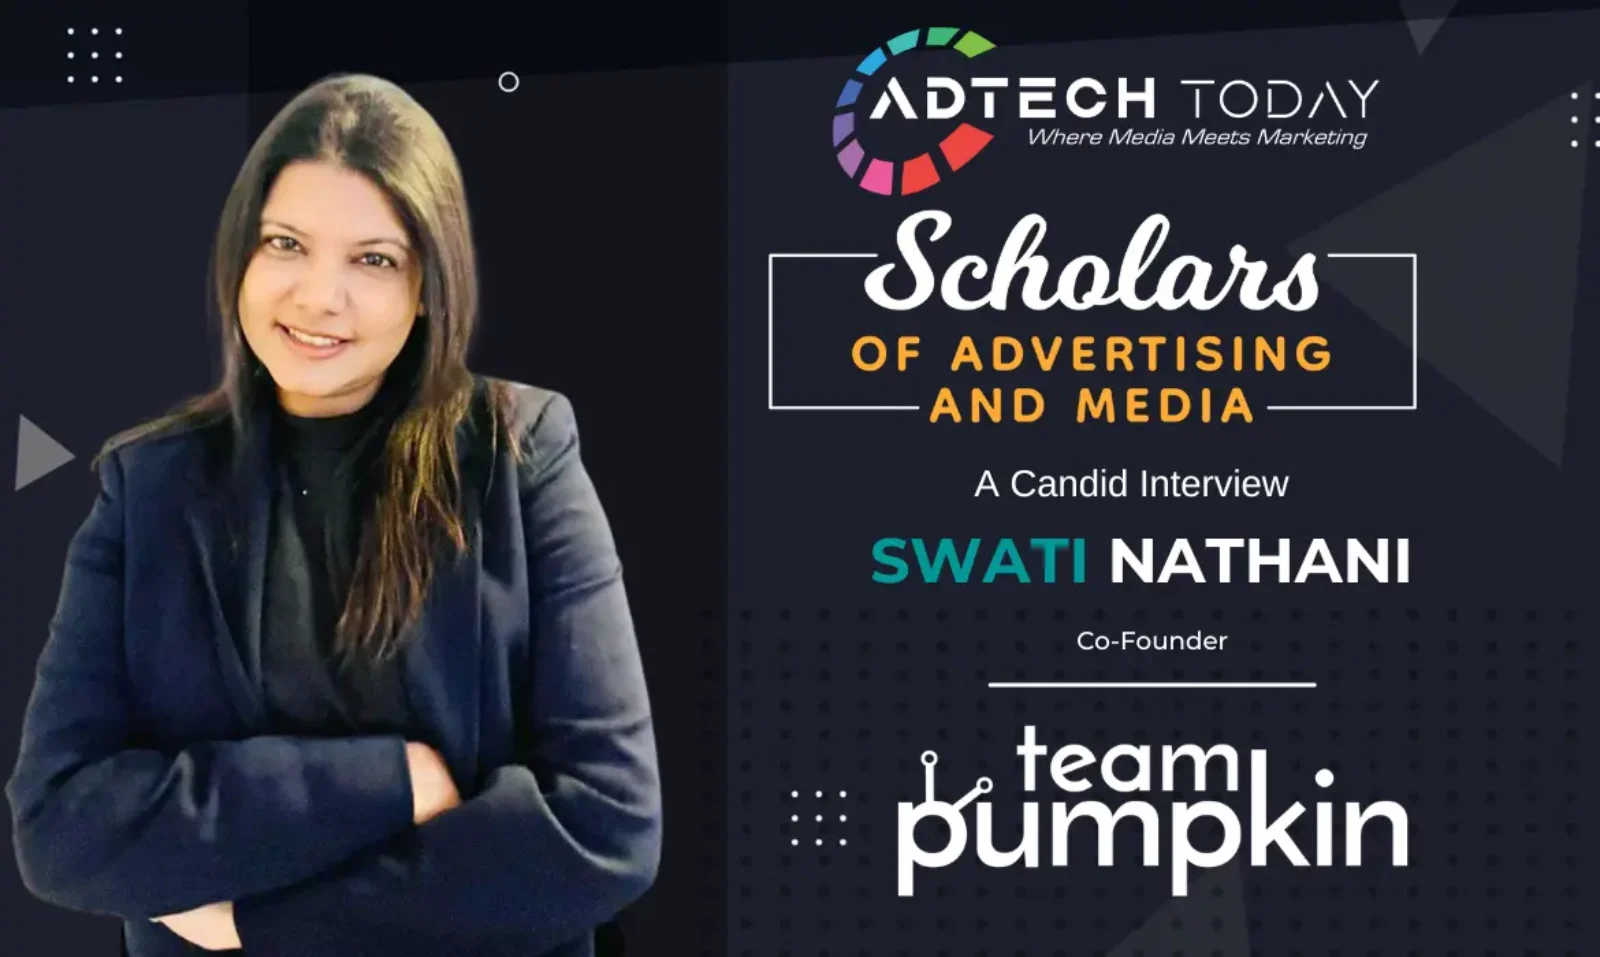 Swati Nathani, Team Pumpkin, advertising, retail operations, consulting, digital marketing, North America, market dynamics, innovative strategies, digital, marketing, marketing agency, independent agency, Indian marketing, measurable results, crafting strategies, Canadian startups, startups, expansion, opportunities, integrated marketing, technology landscape, tech and marketing, positive impact, reputation, team morale, validation, independent validation, track record, holistic creativity, cutting-edge, AI, artificial intelligence, out-of-the-box, digital tools, immersive experience, strategic vision, design expertise, generative AI, gen AI, storytelling, social media, social media marketing, future, transparency, honesty, integrity,